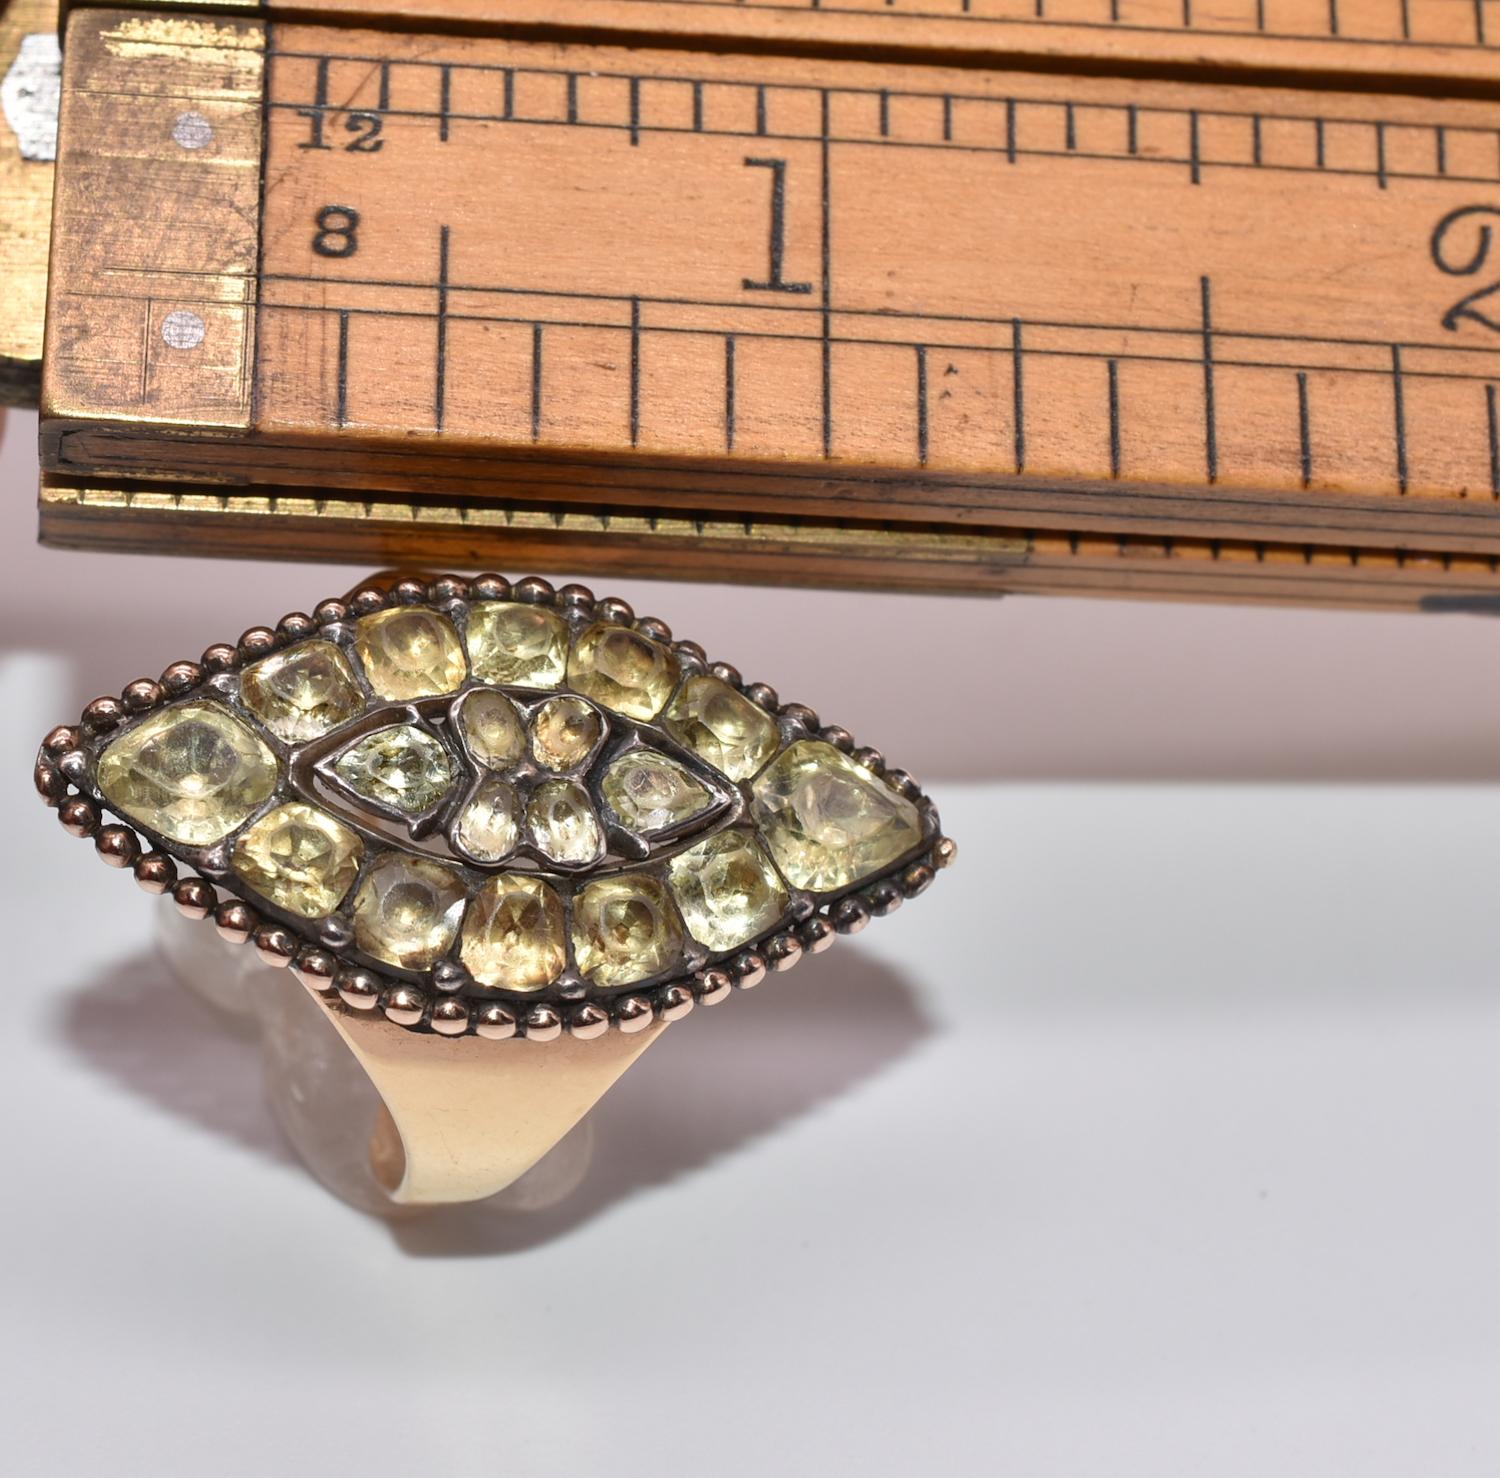 Antique marquise shaped 18K gold and chrysoberyl ring is an excellent example of Portuguese jewelry of the late 18th century. The Portuguese mined these gemstones from their colony in Brazil and created jewelry that was typically pave-set as seen